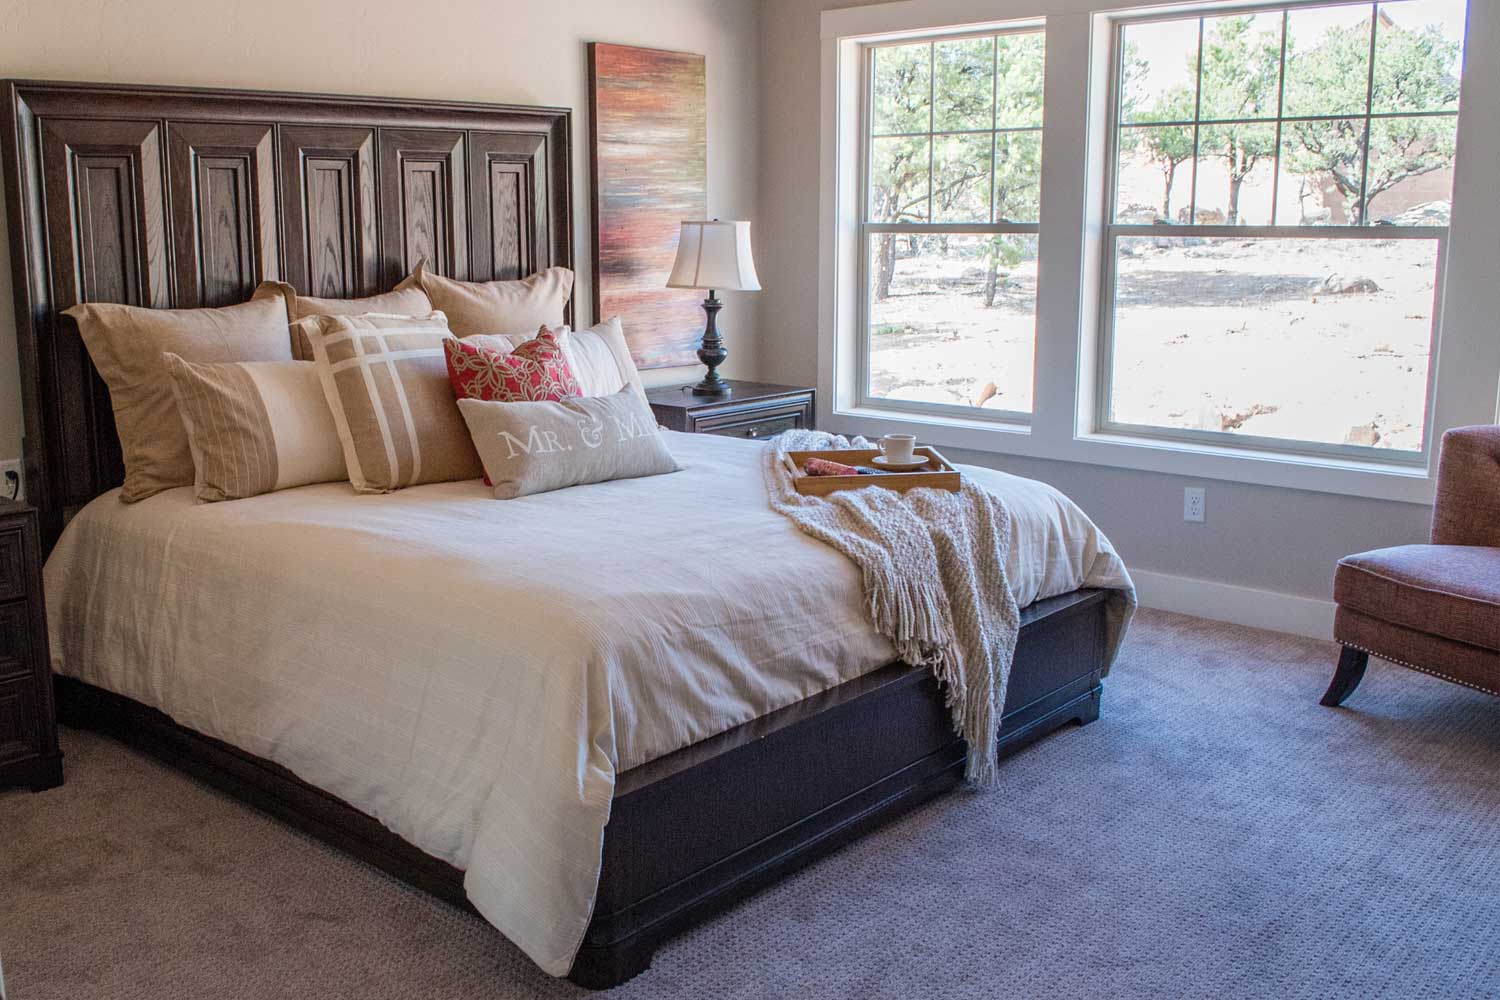 master bedroom with king size bed, side tables, and window view into backyard